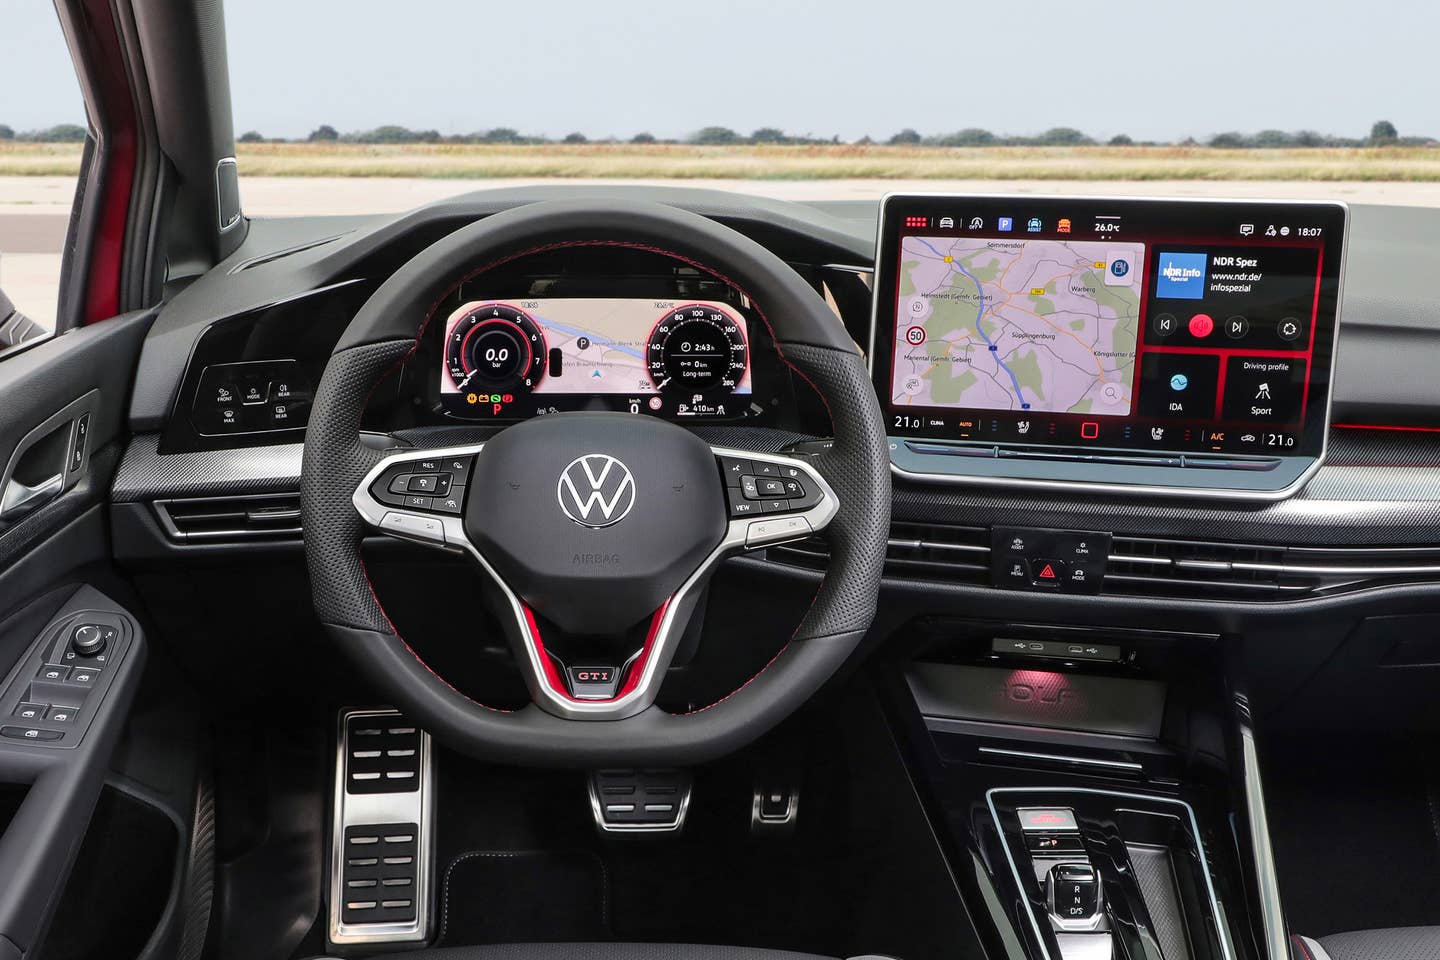 The 2025 Volkswagen GTI's updated interior features hard buttons on the steering wheel.